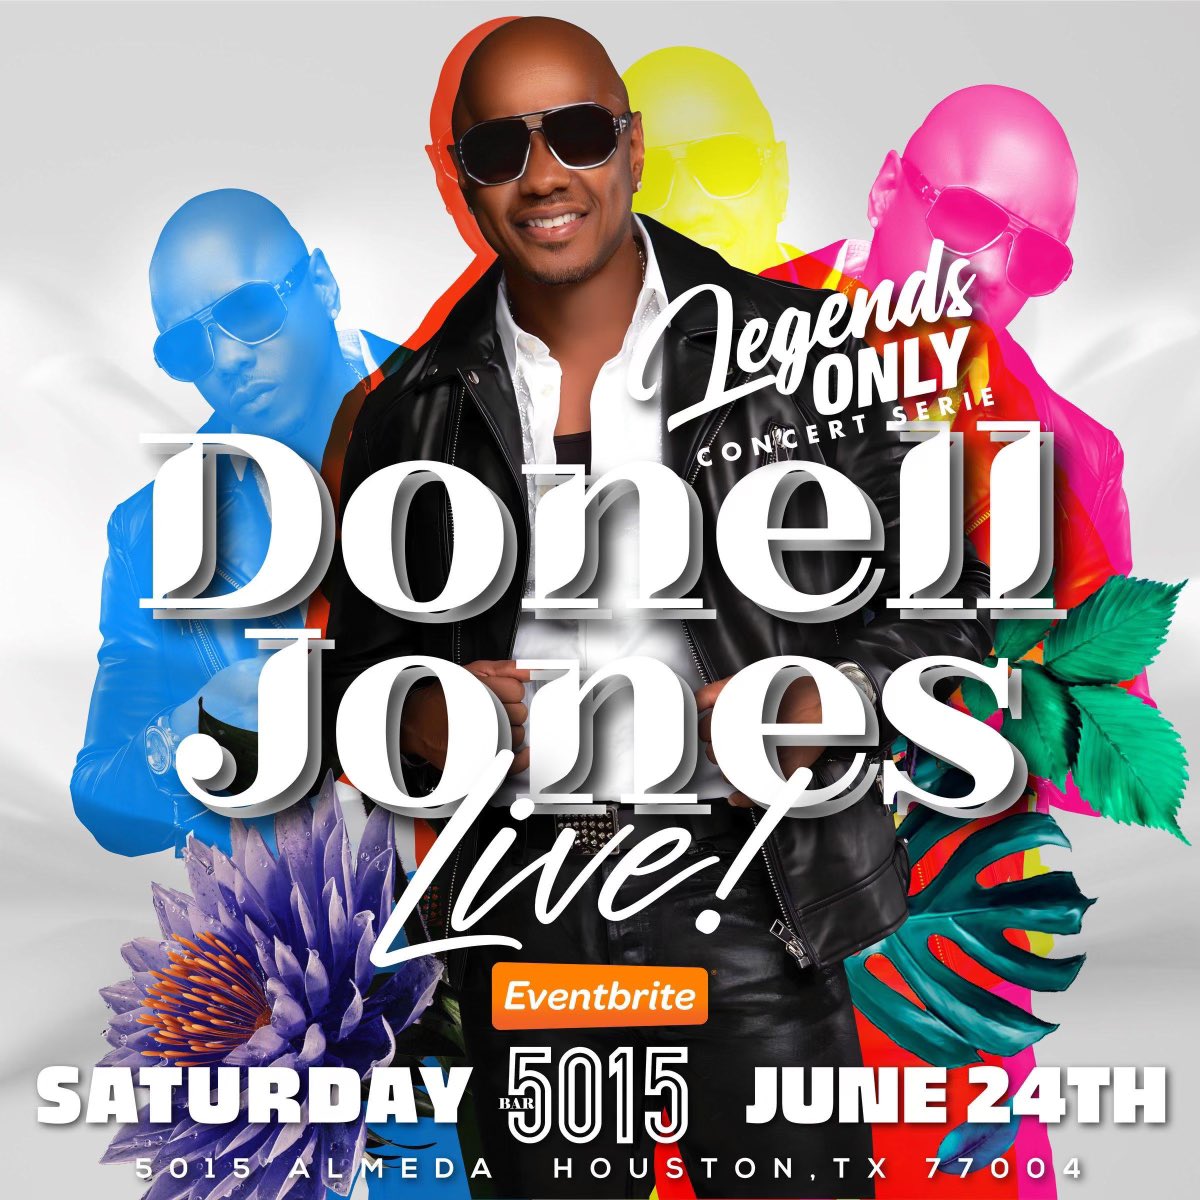 We’re in the building! Excited to meet him in person 📍 

#953jamz #bar5015 #legendsonlyconcertseries #donelljones #houston